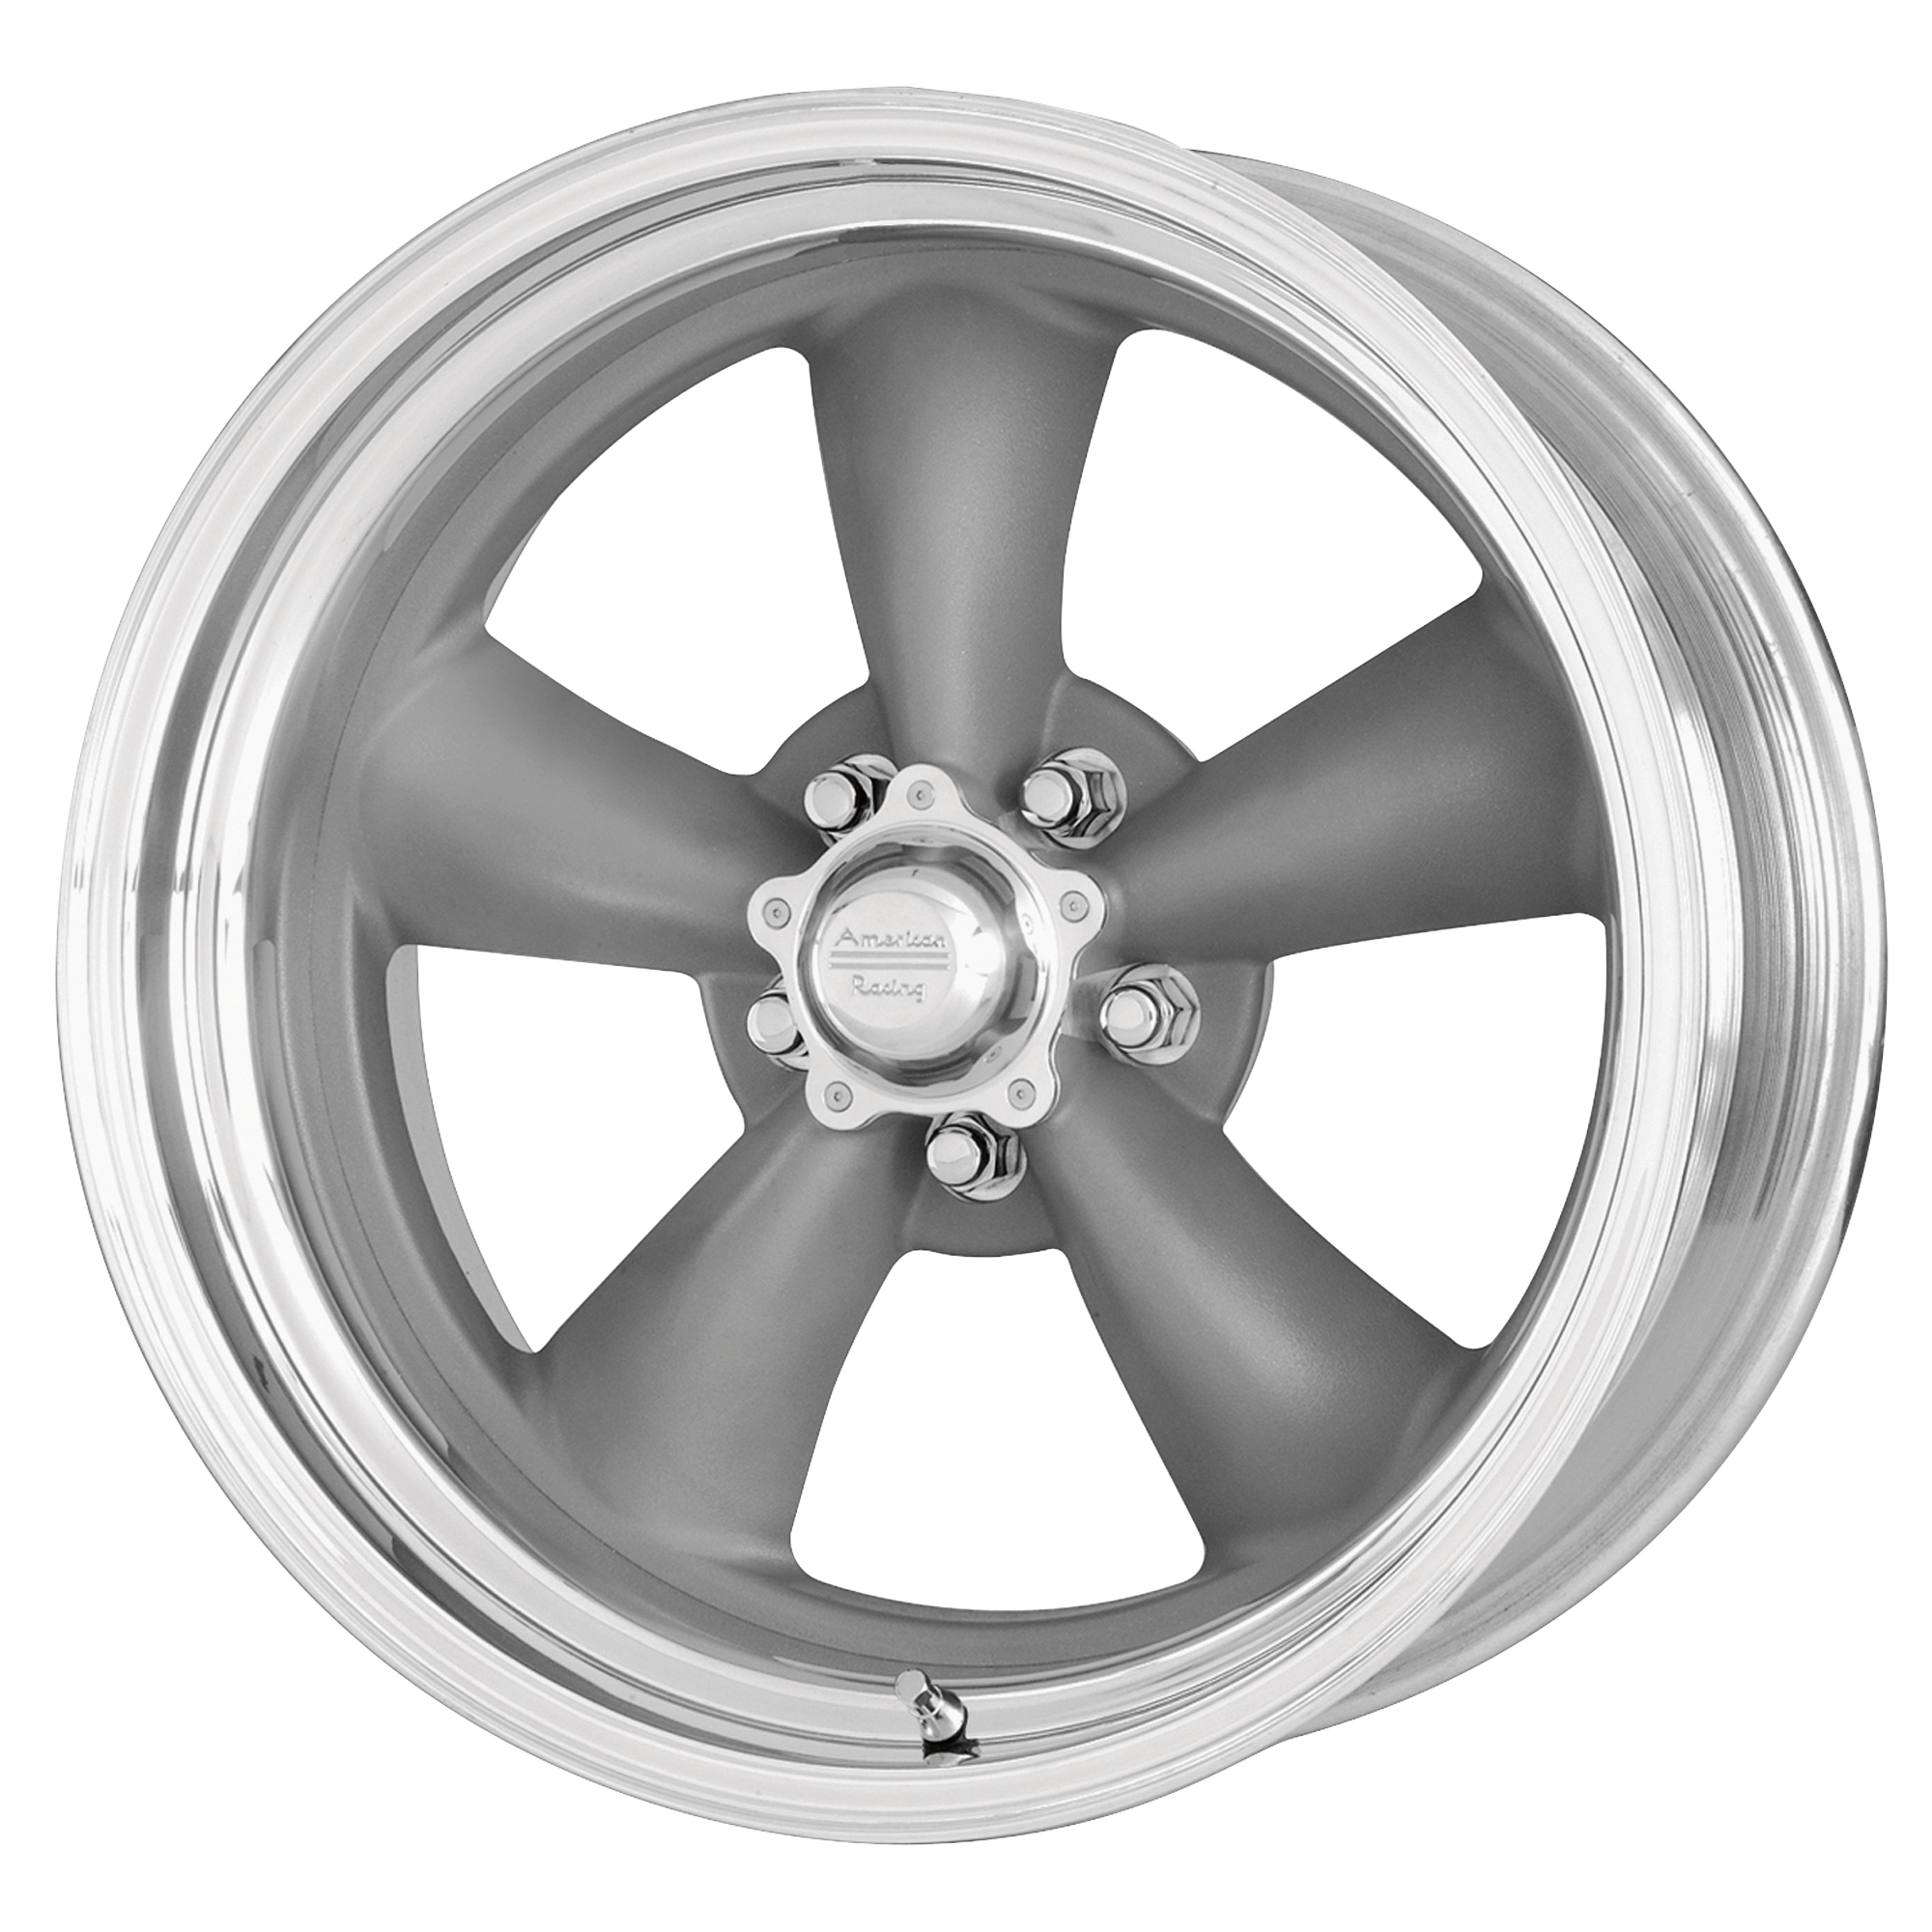 CLASSIC TORQ THRUST II ONE PIECE 15x10 5x127.00 MAG GRAY W/ MACHINED LIP (-44 mm) - Tires and Engine Performance